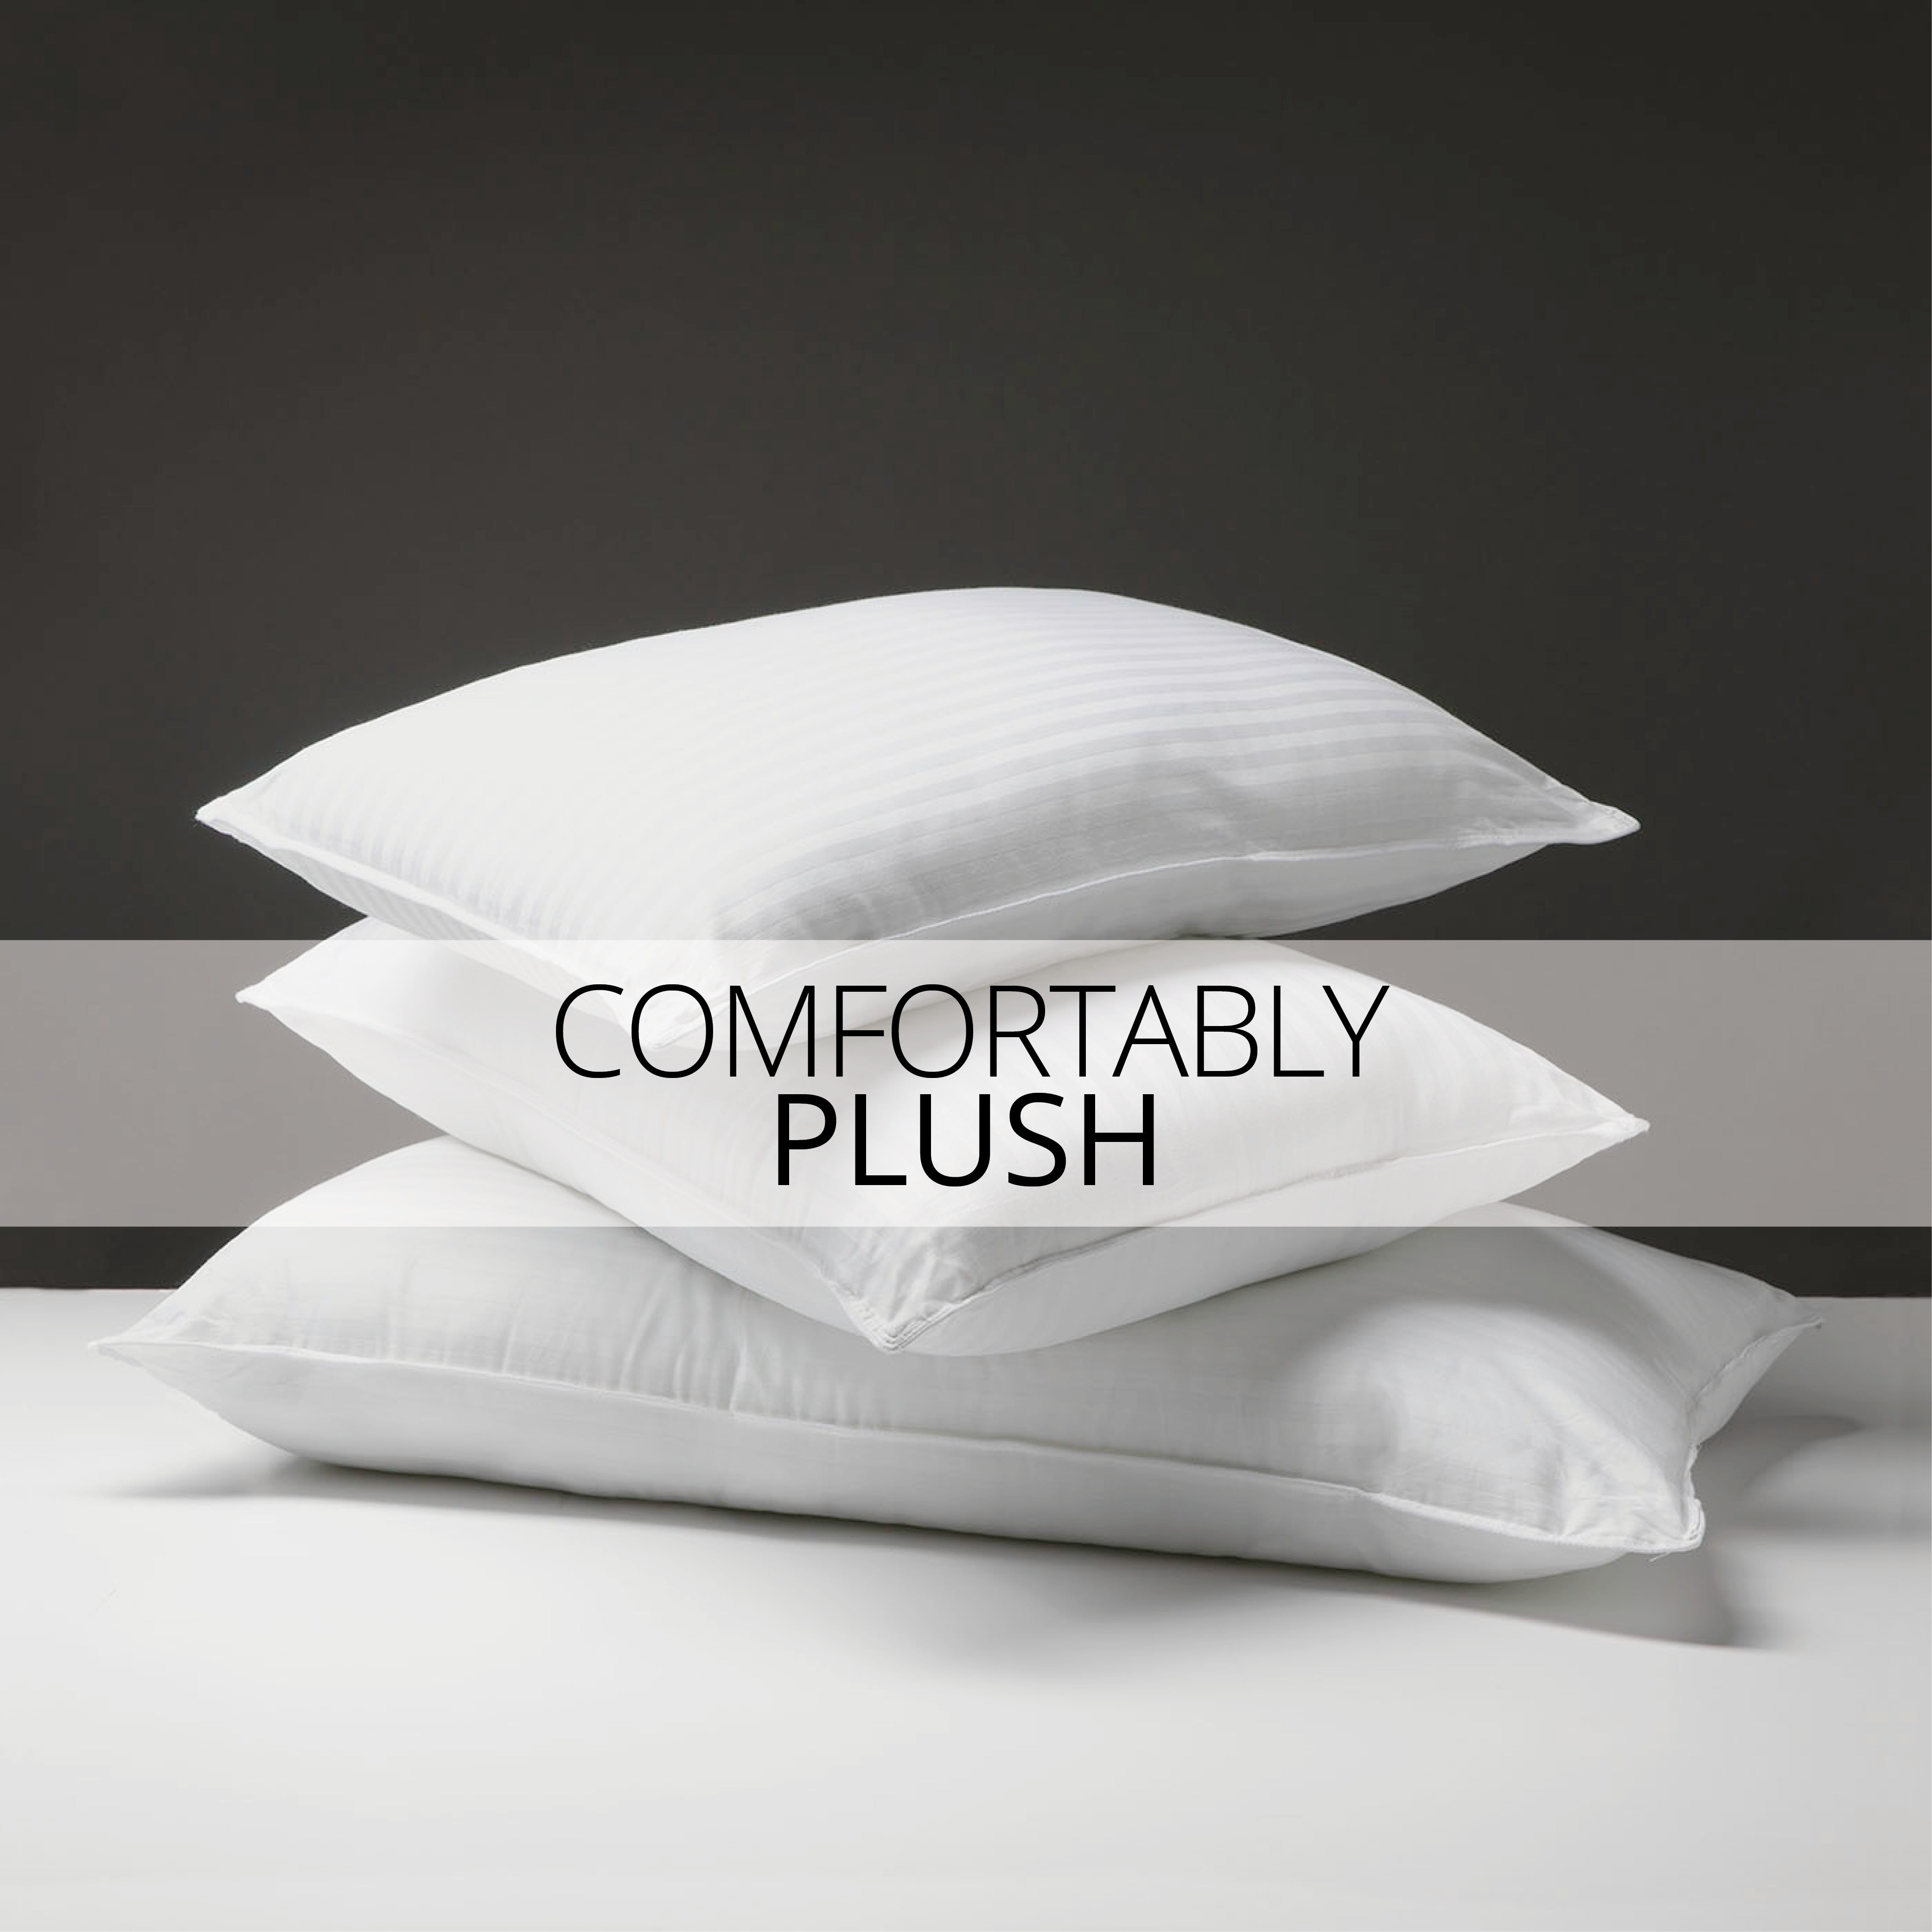 Sobella Soft and Supremo Stomach Sleeper Pillows by Sobel Westex 